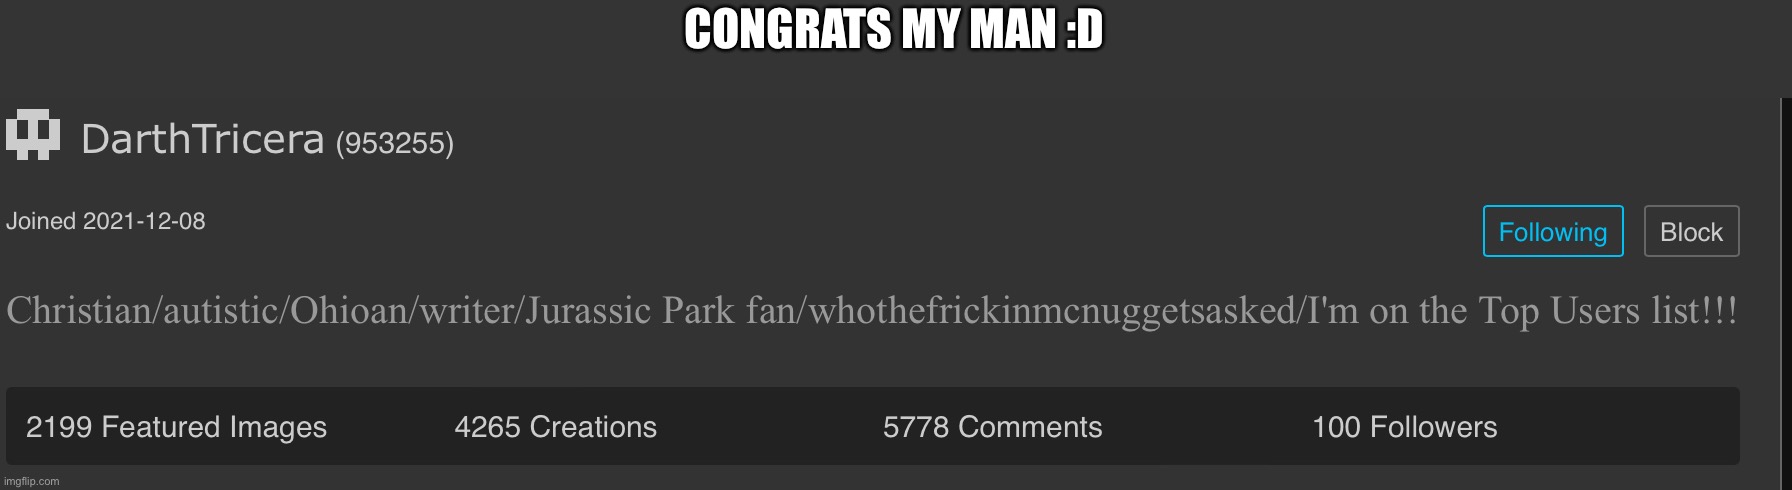 :D | CONGRATS MY MAN :D | image tagged in congratulations,100,followers | made w/ Imgflip meme maker